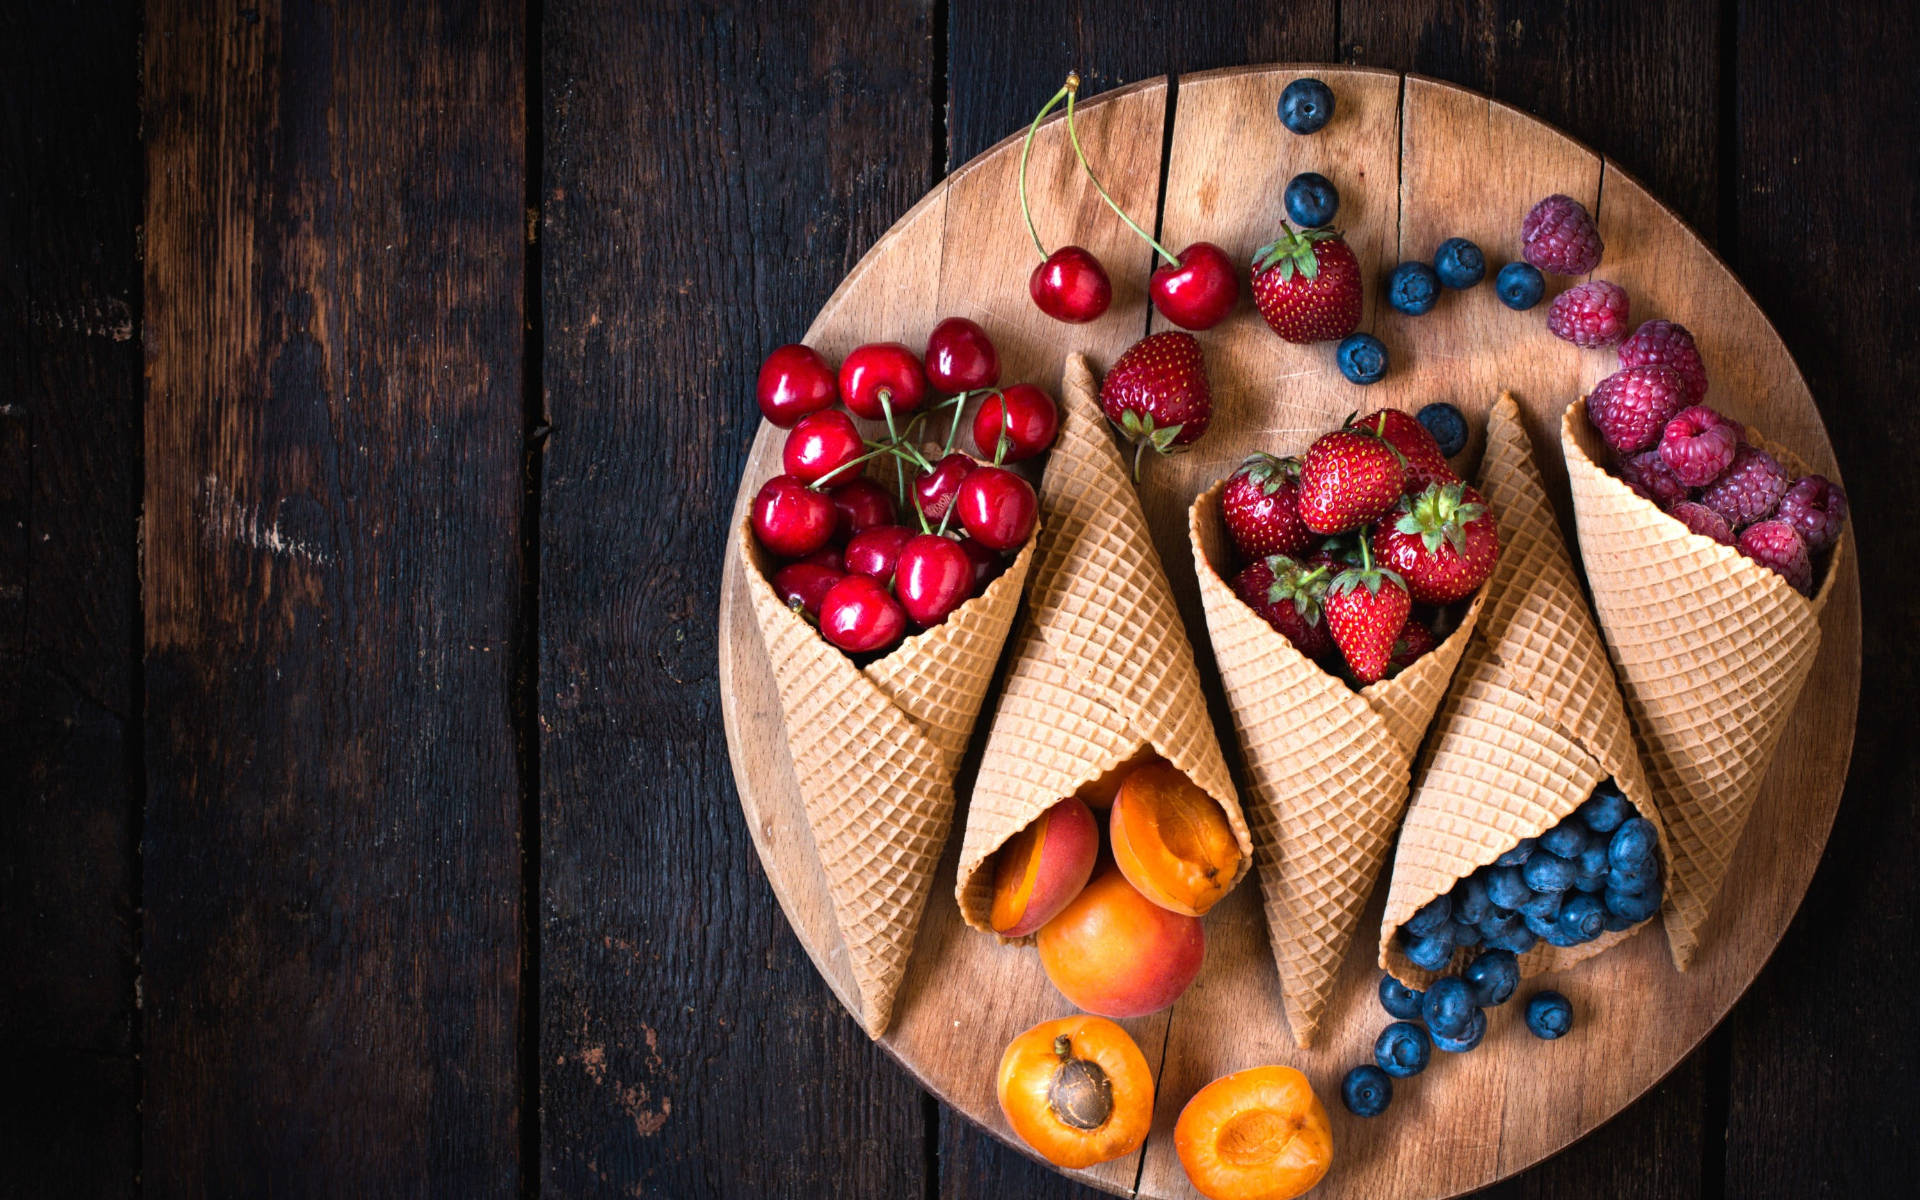 Cones Filled With Berries Wallpaper